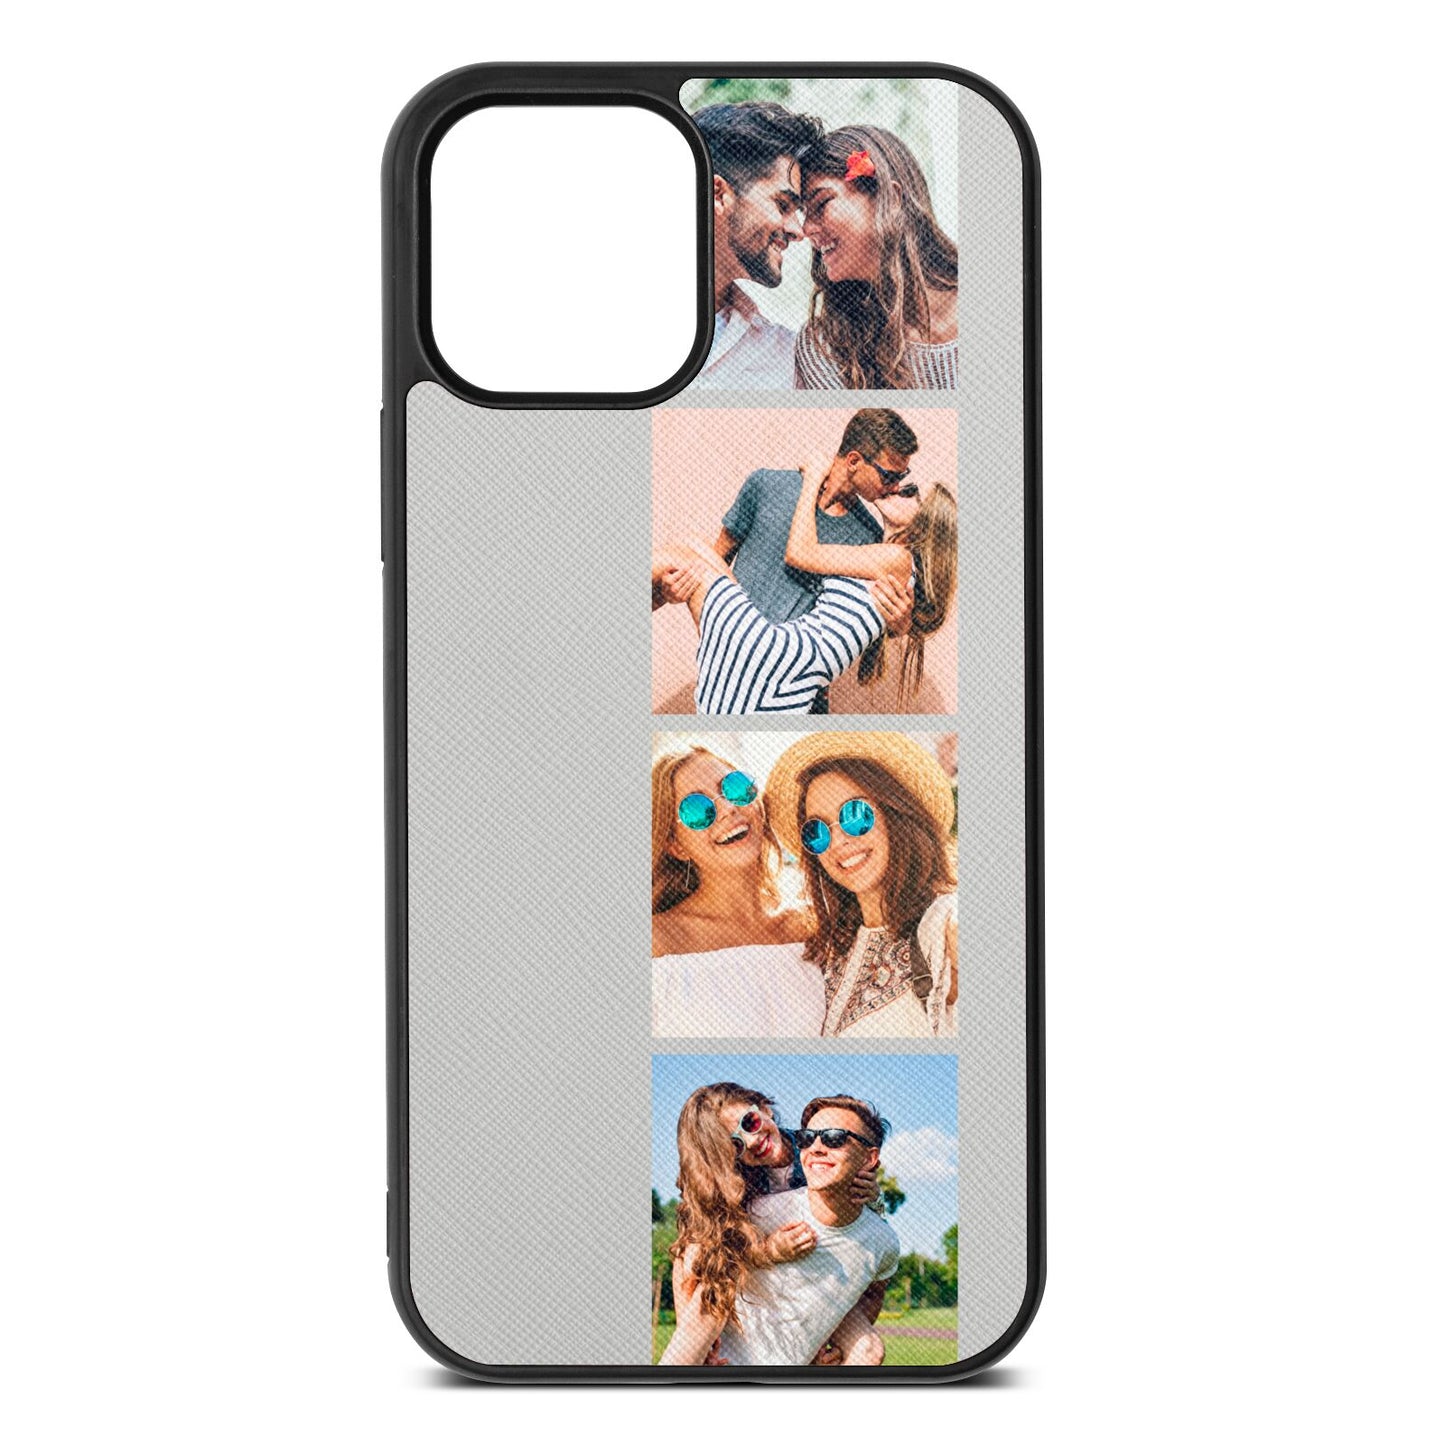 Photo Strip Montage Upload Silver Saffiano Leather iPhone 12 Case